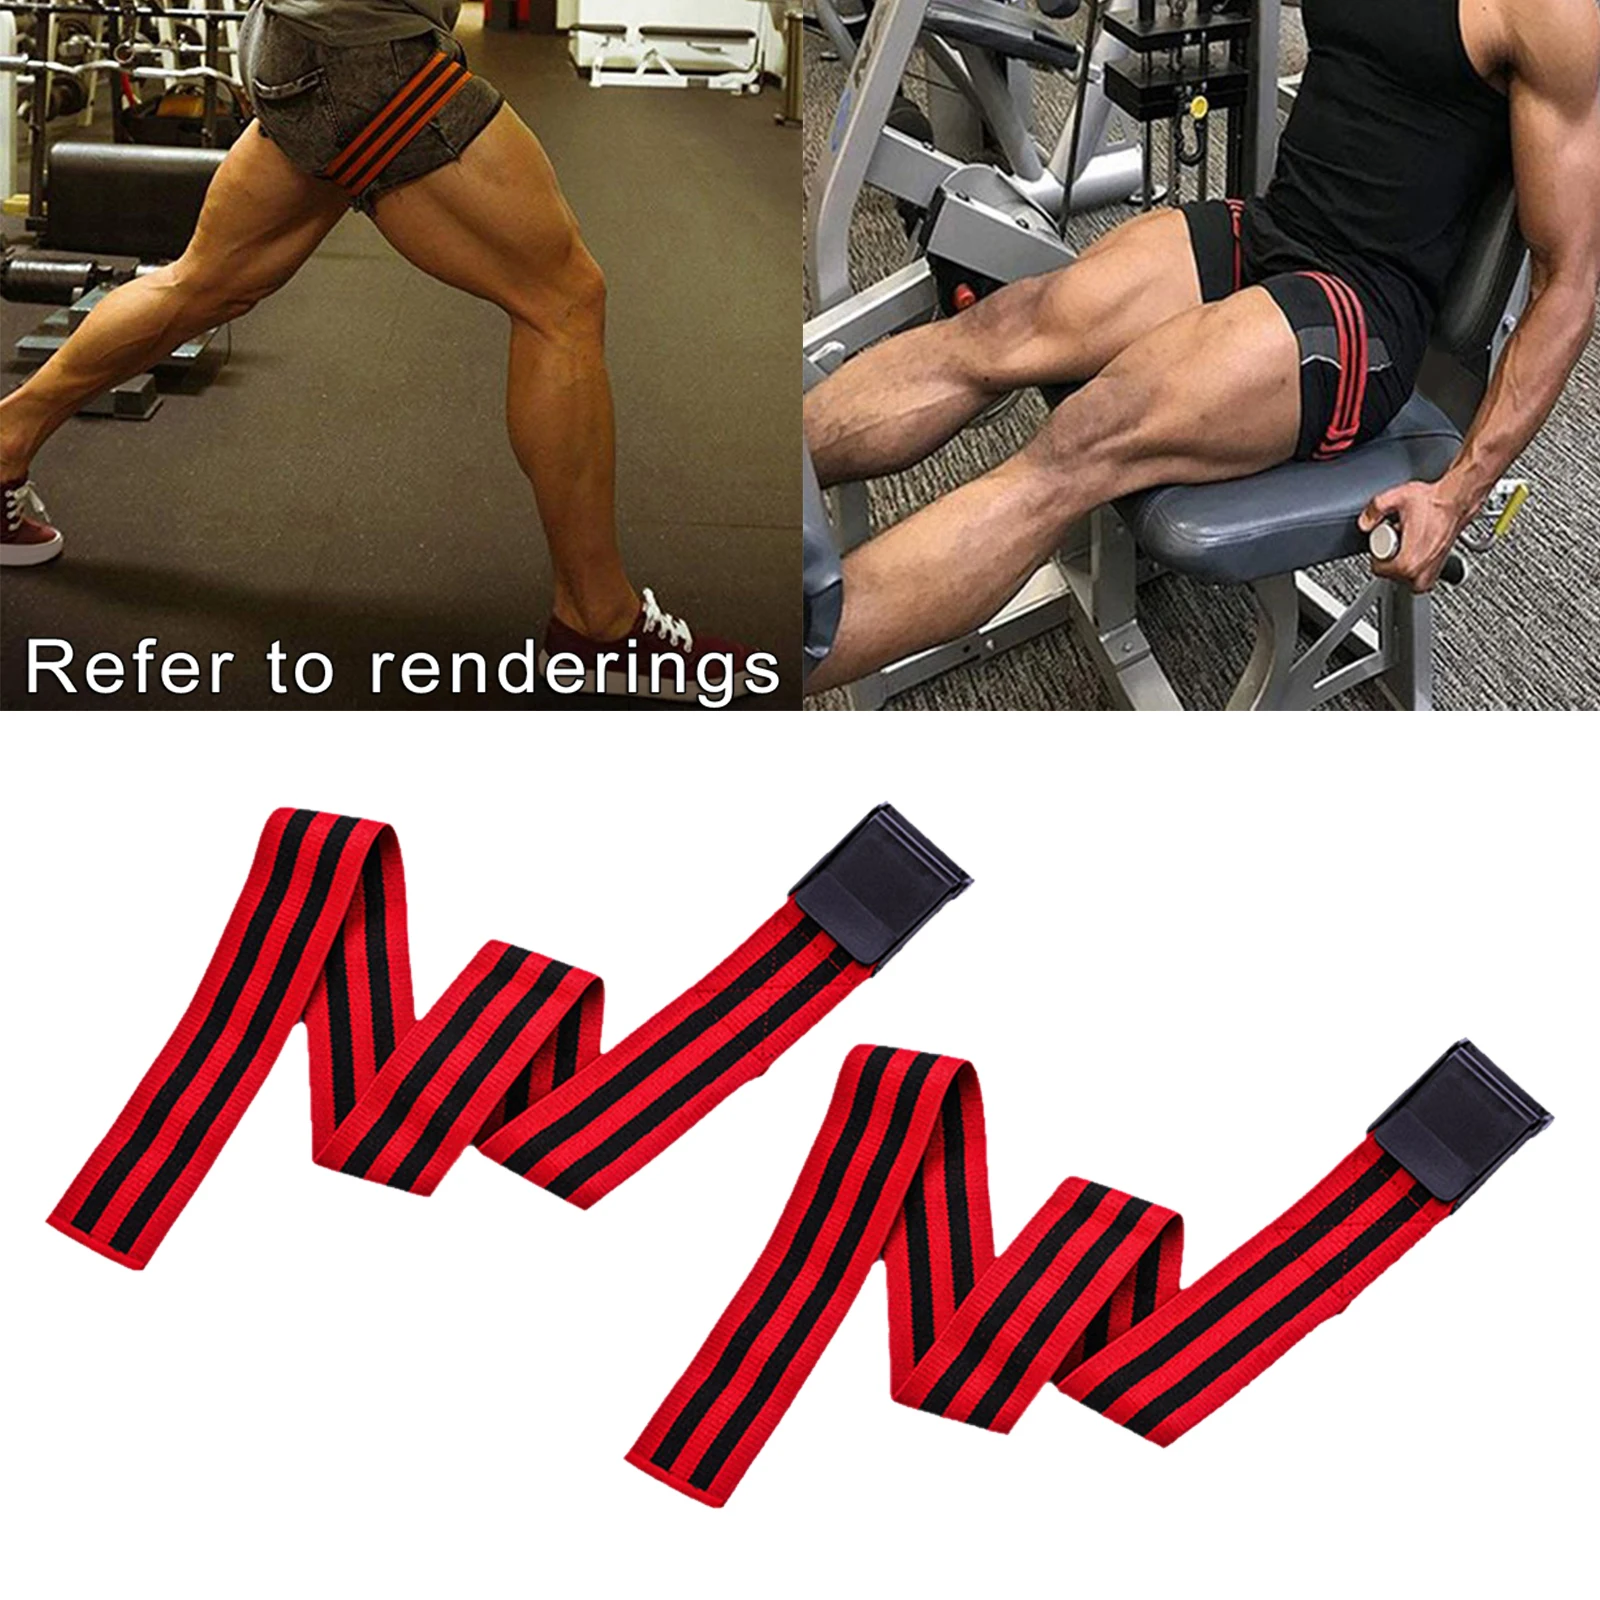 Exercise Occlusion Training Bands Arms legs Blood Flow Restriction Band